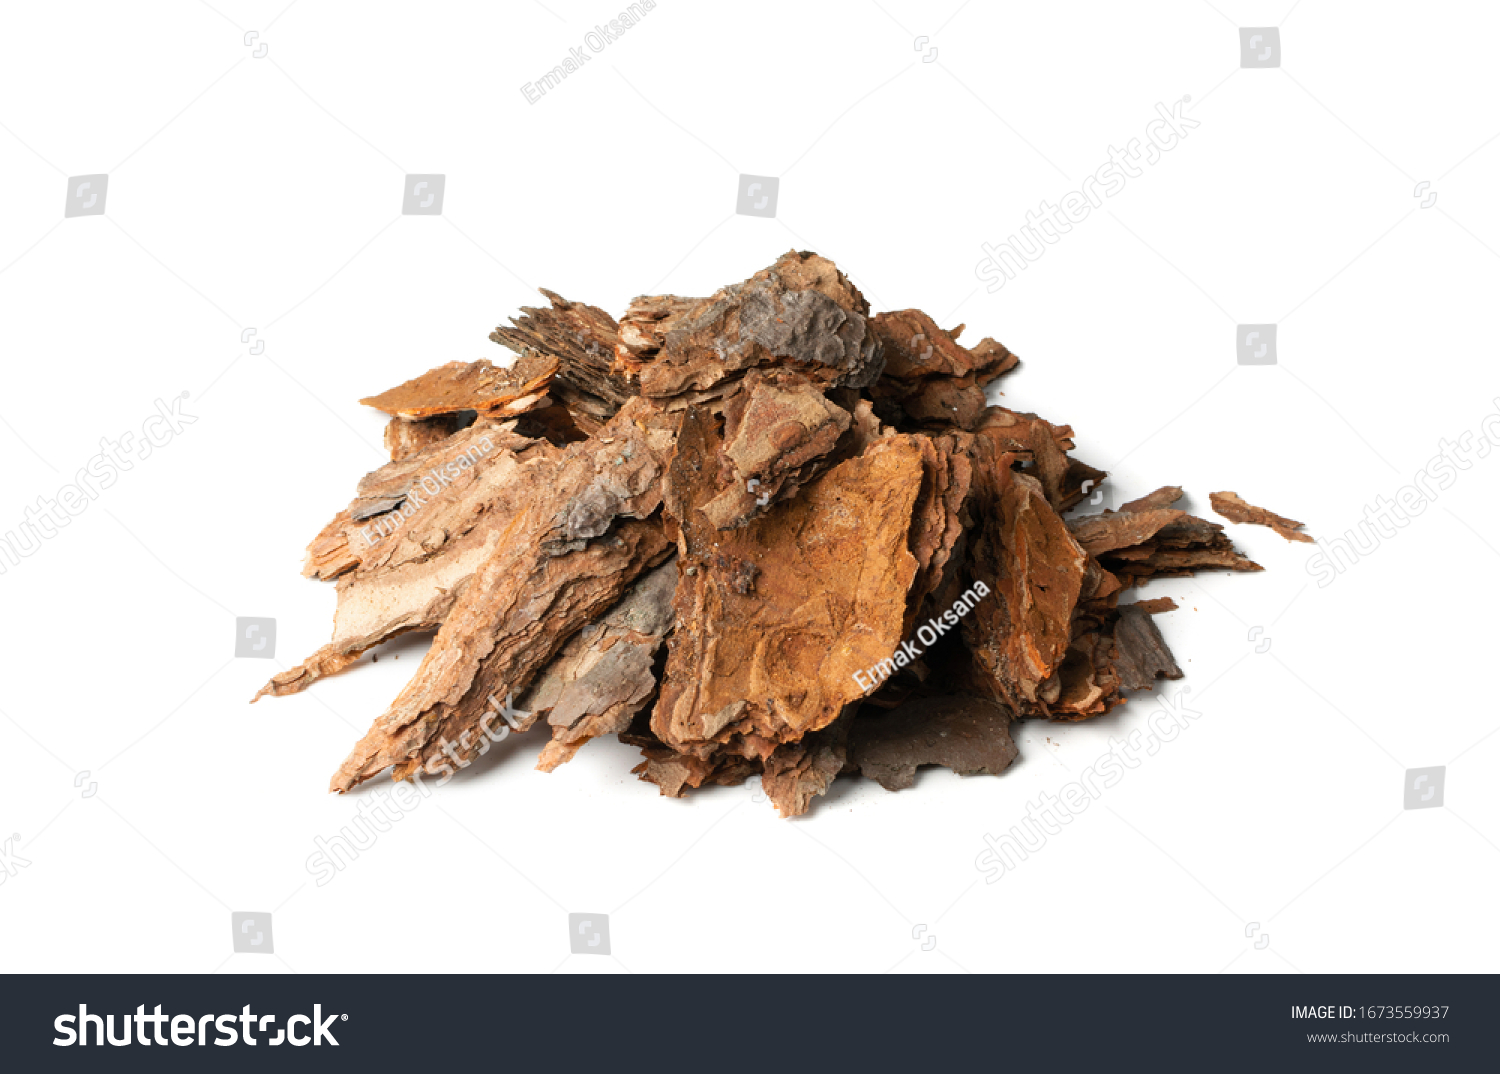 Heap of Dry Pine Tree Bark Pieces Isolated on White. Broken Woods Nature Chip #1673559937